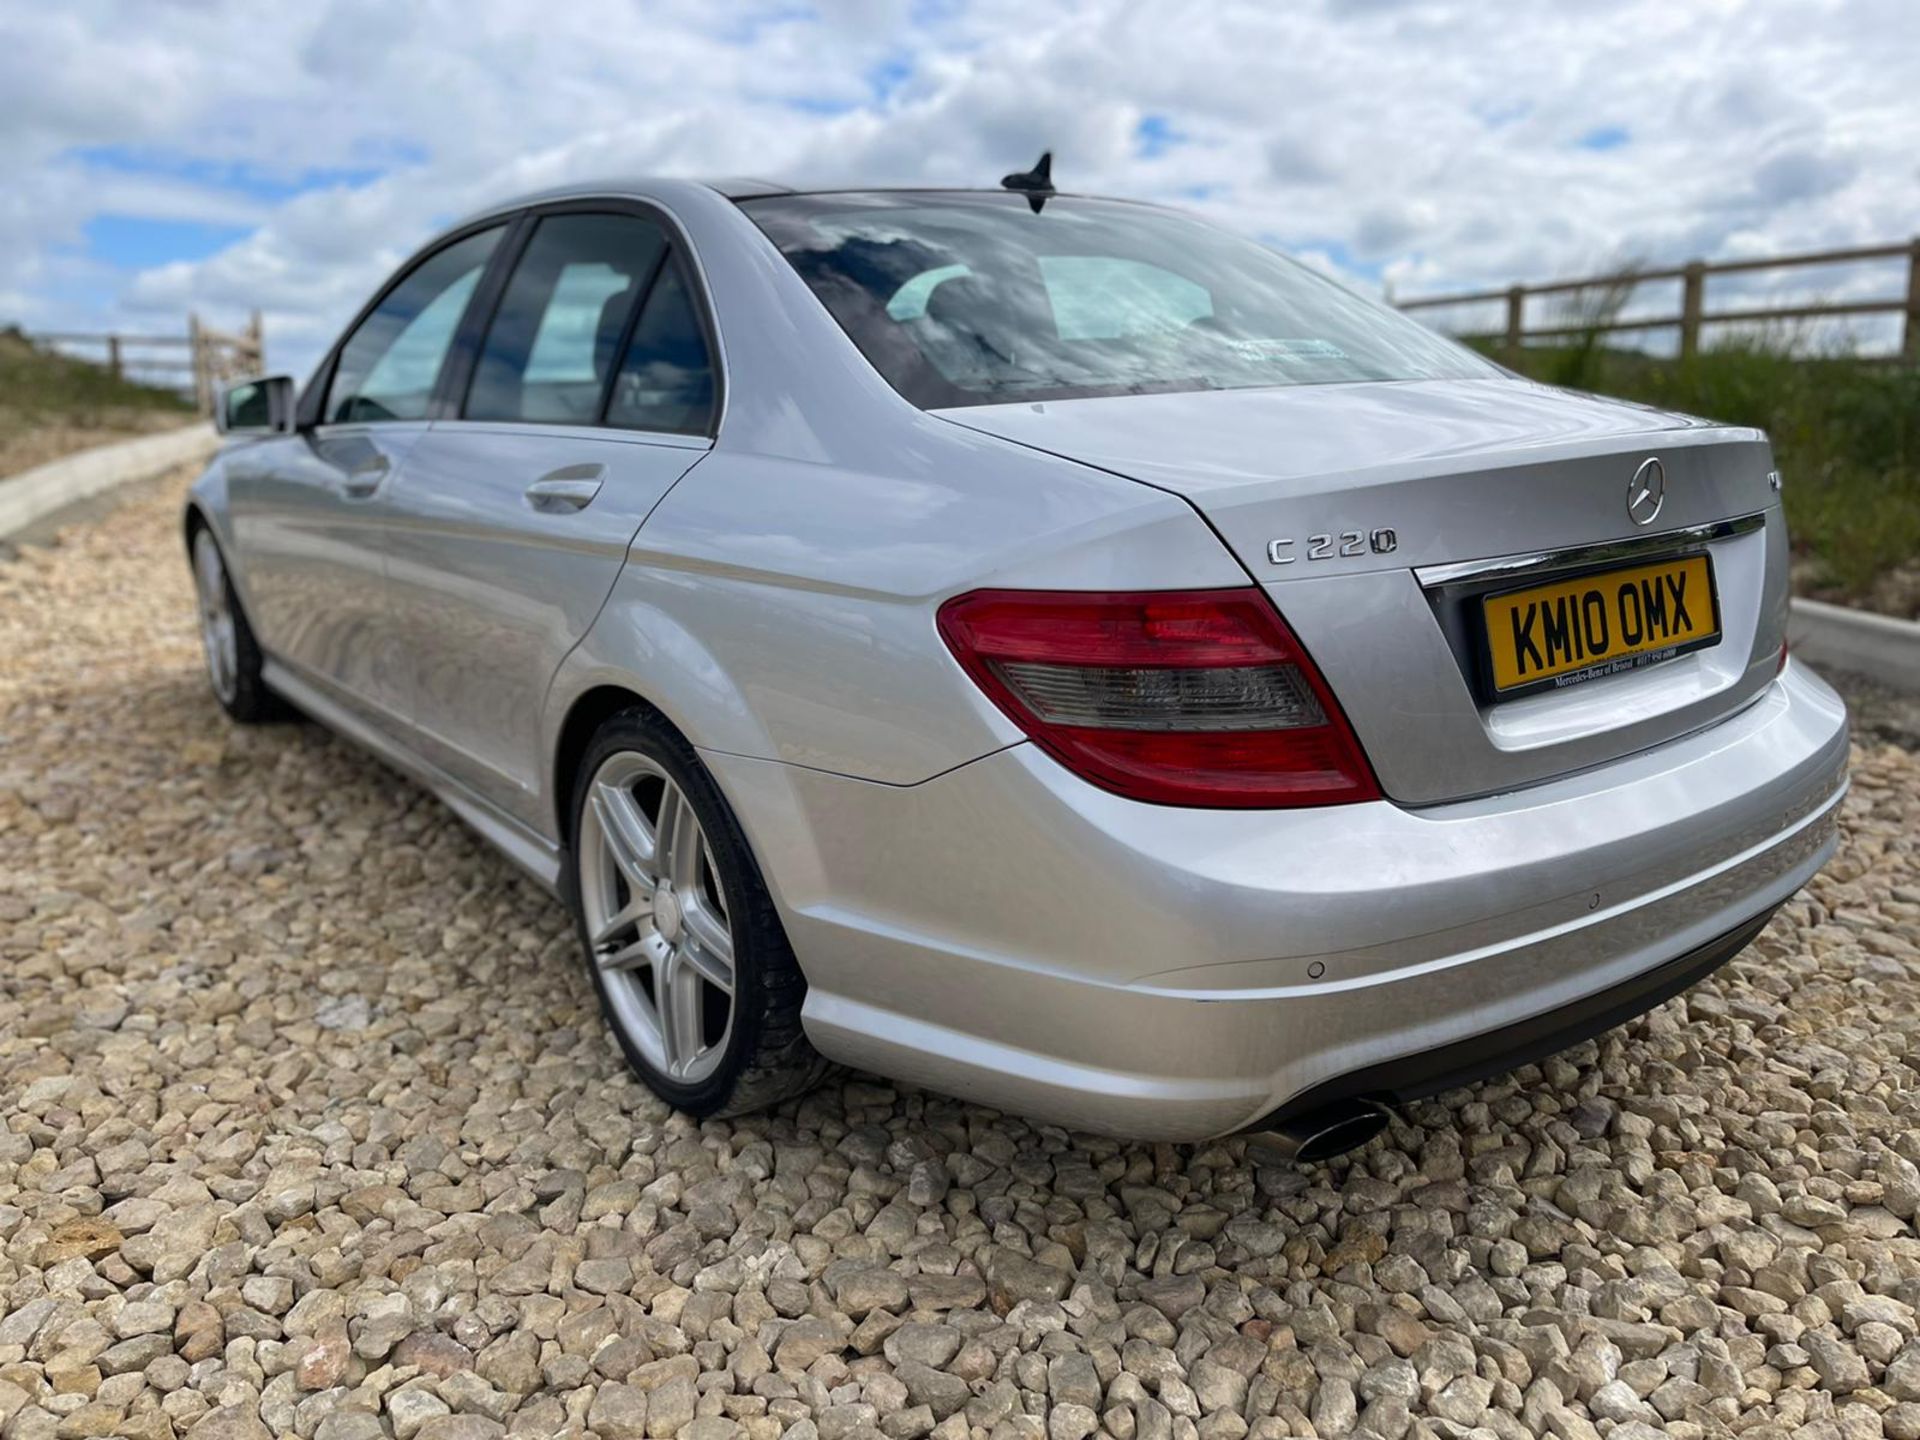 2010 MERCEDES-BENZ C220 BLUEF-CY SPORT CDI A, PANORAMIC ROOF AND PHONE CONNECTIVITY *NO VAT* - Image 3 of 11